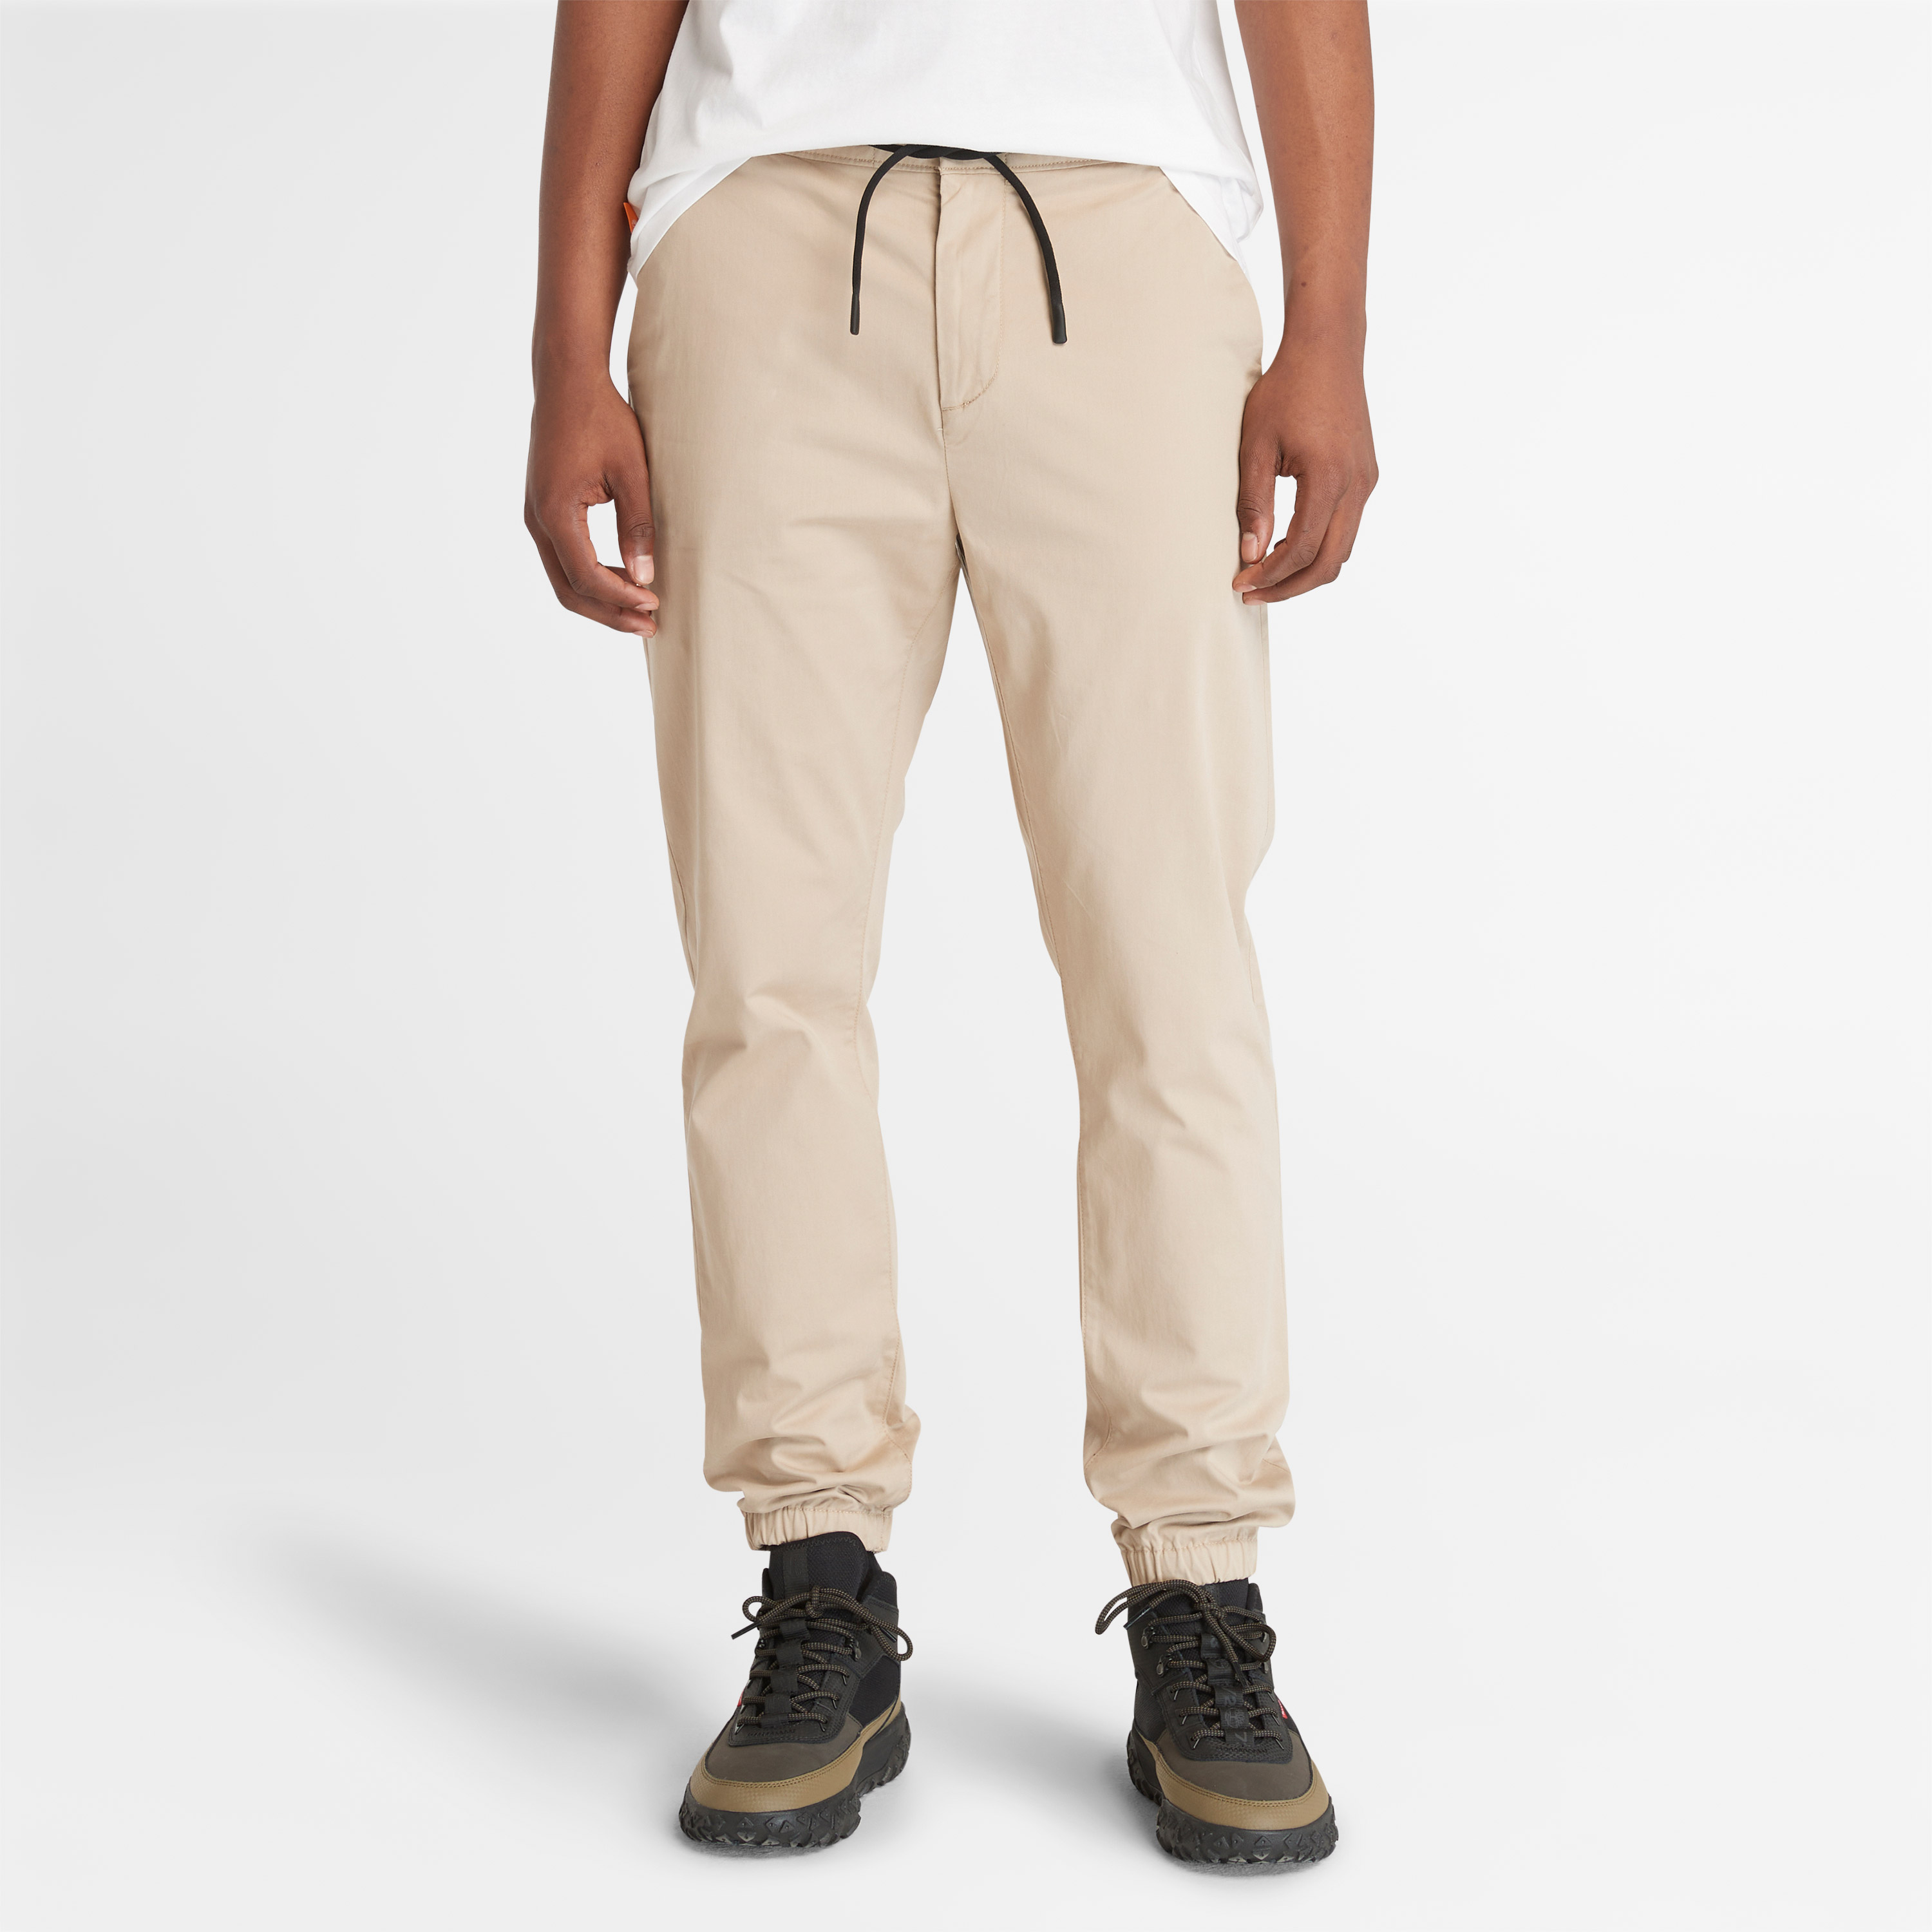 Urban Renewal Vintage Chino Pant | Urban Outfitters Singapore - Clothing,  Music, Home & Accessories